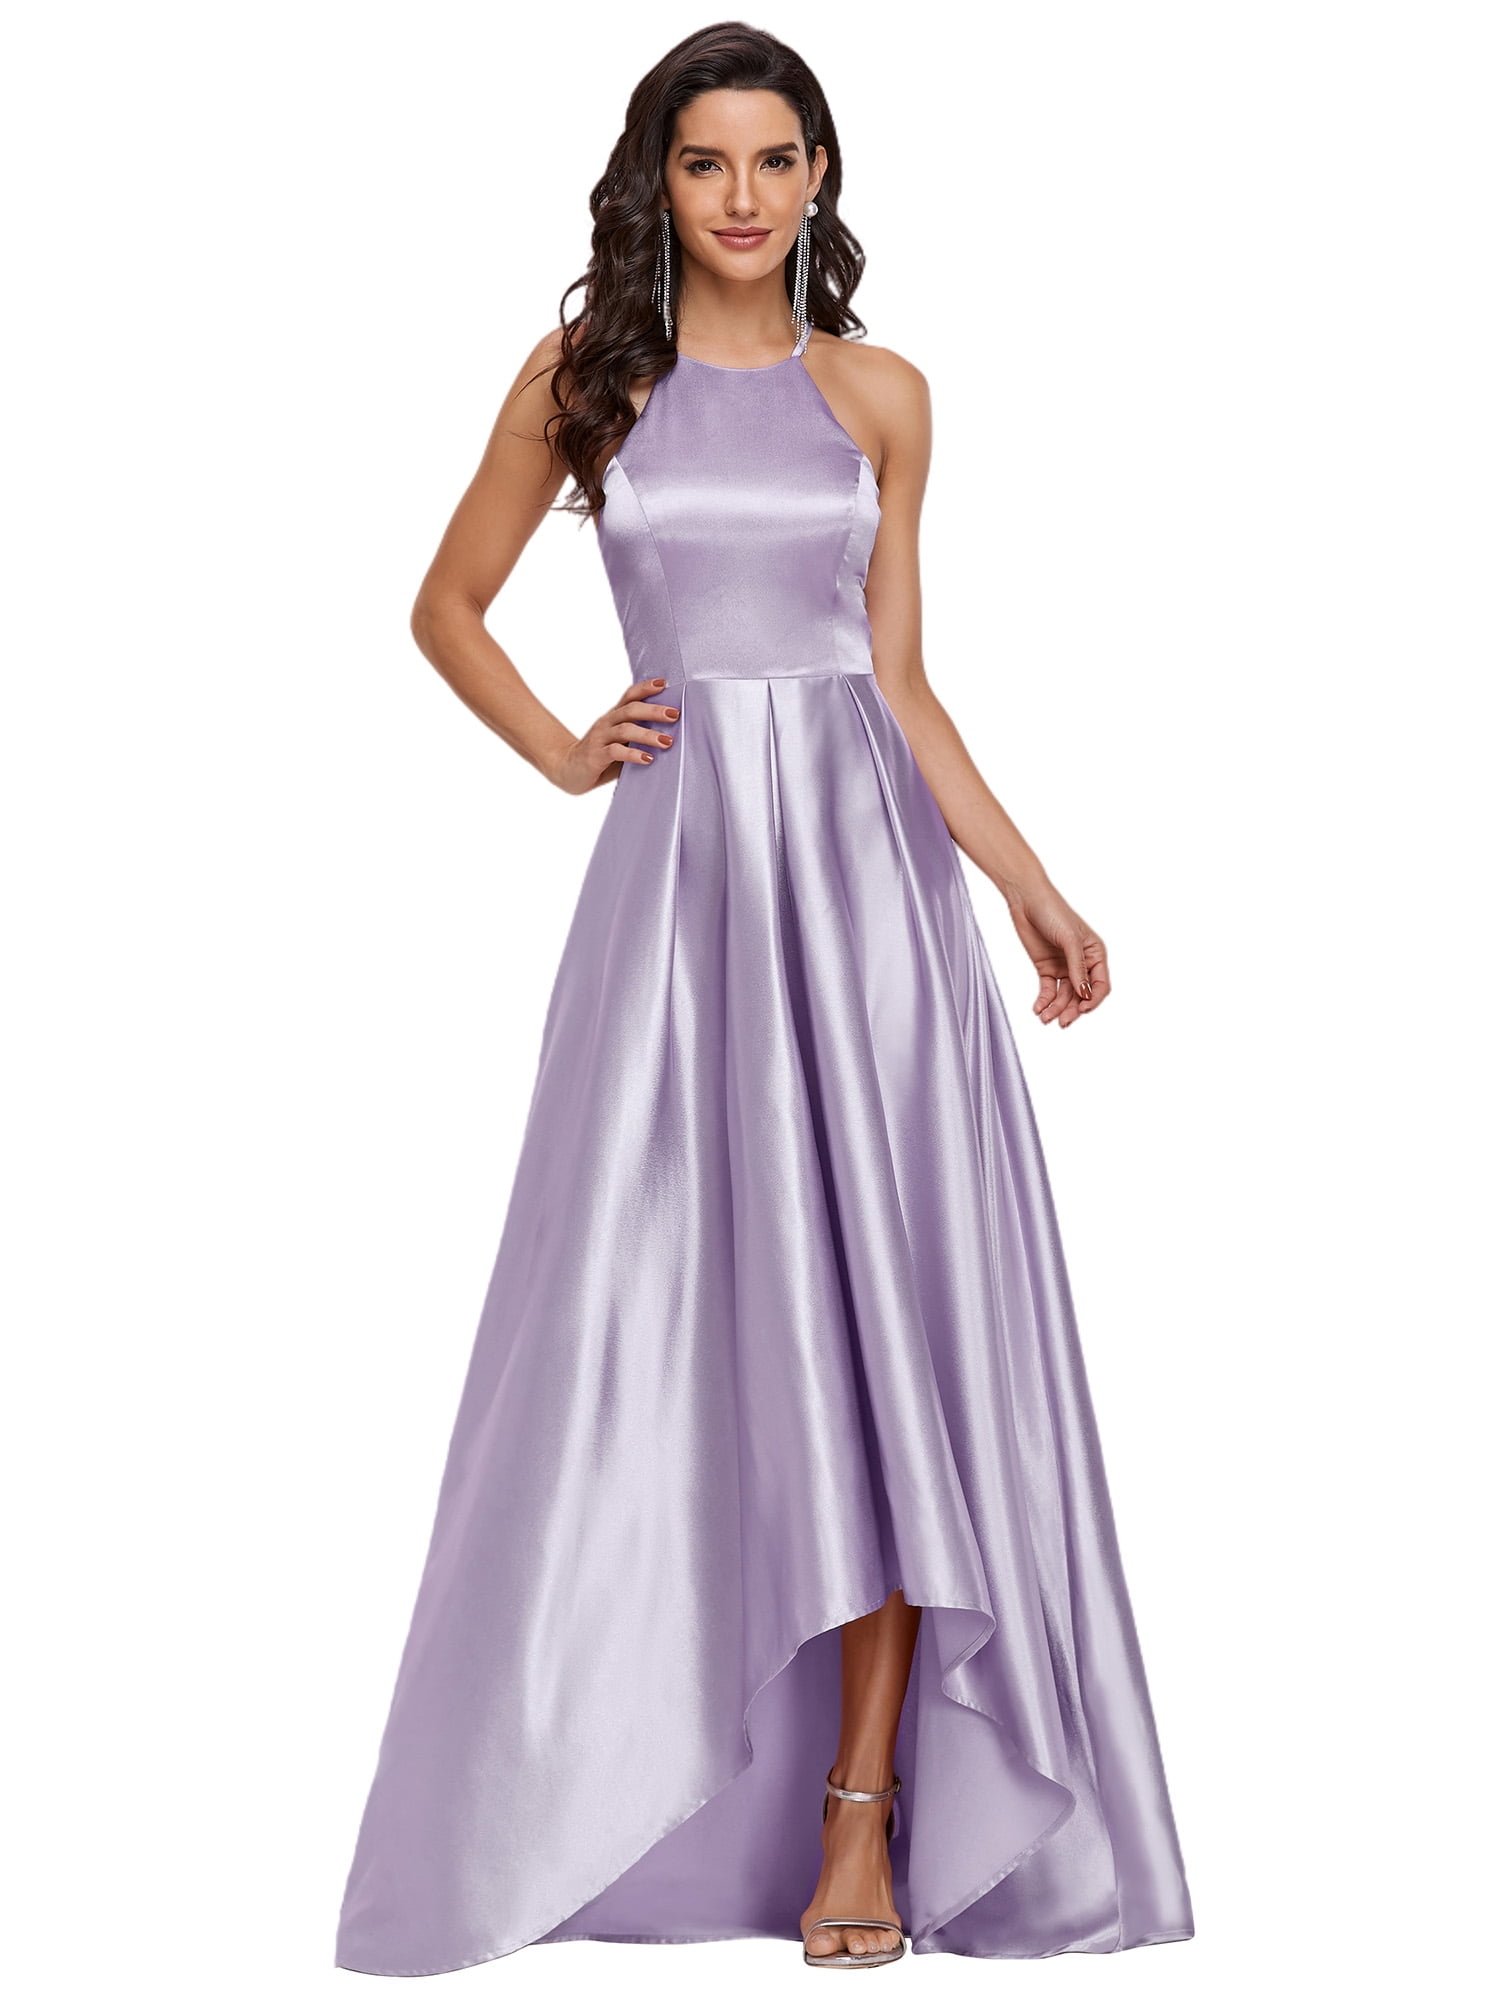 Womens Halter A Line Ruched Satin Homecoming Dress Short Evening Party Gown with Pockets